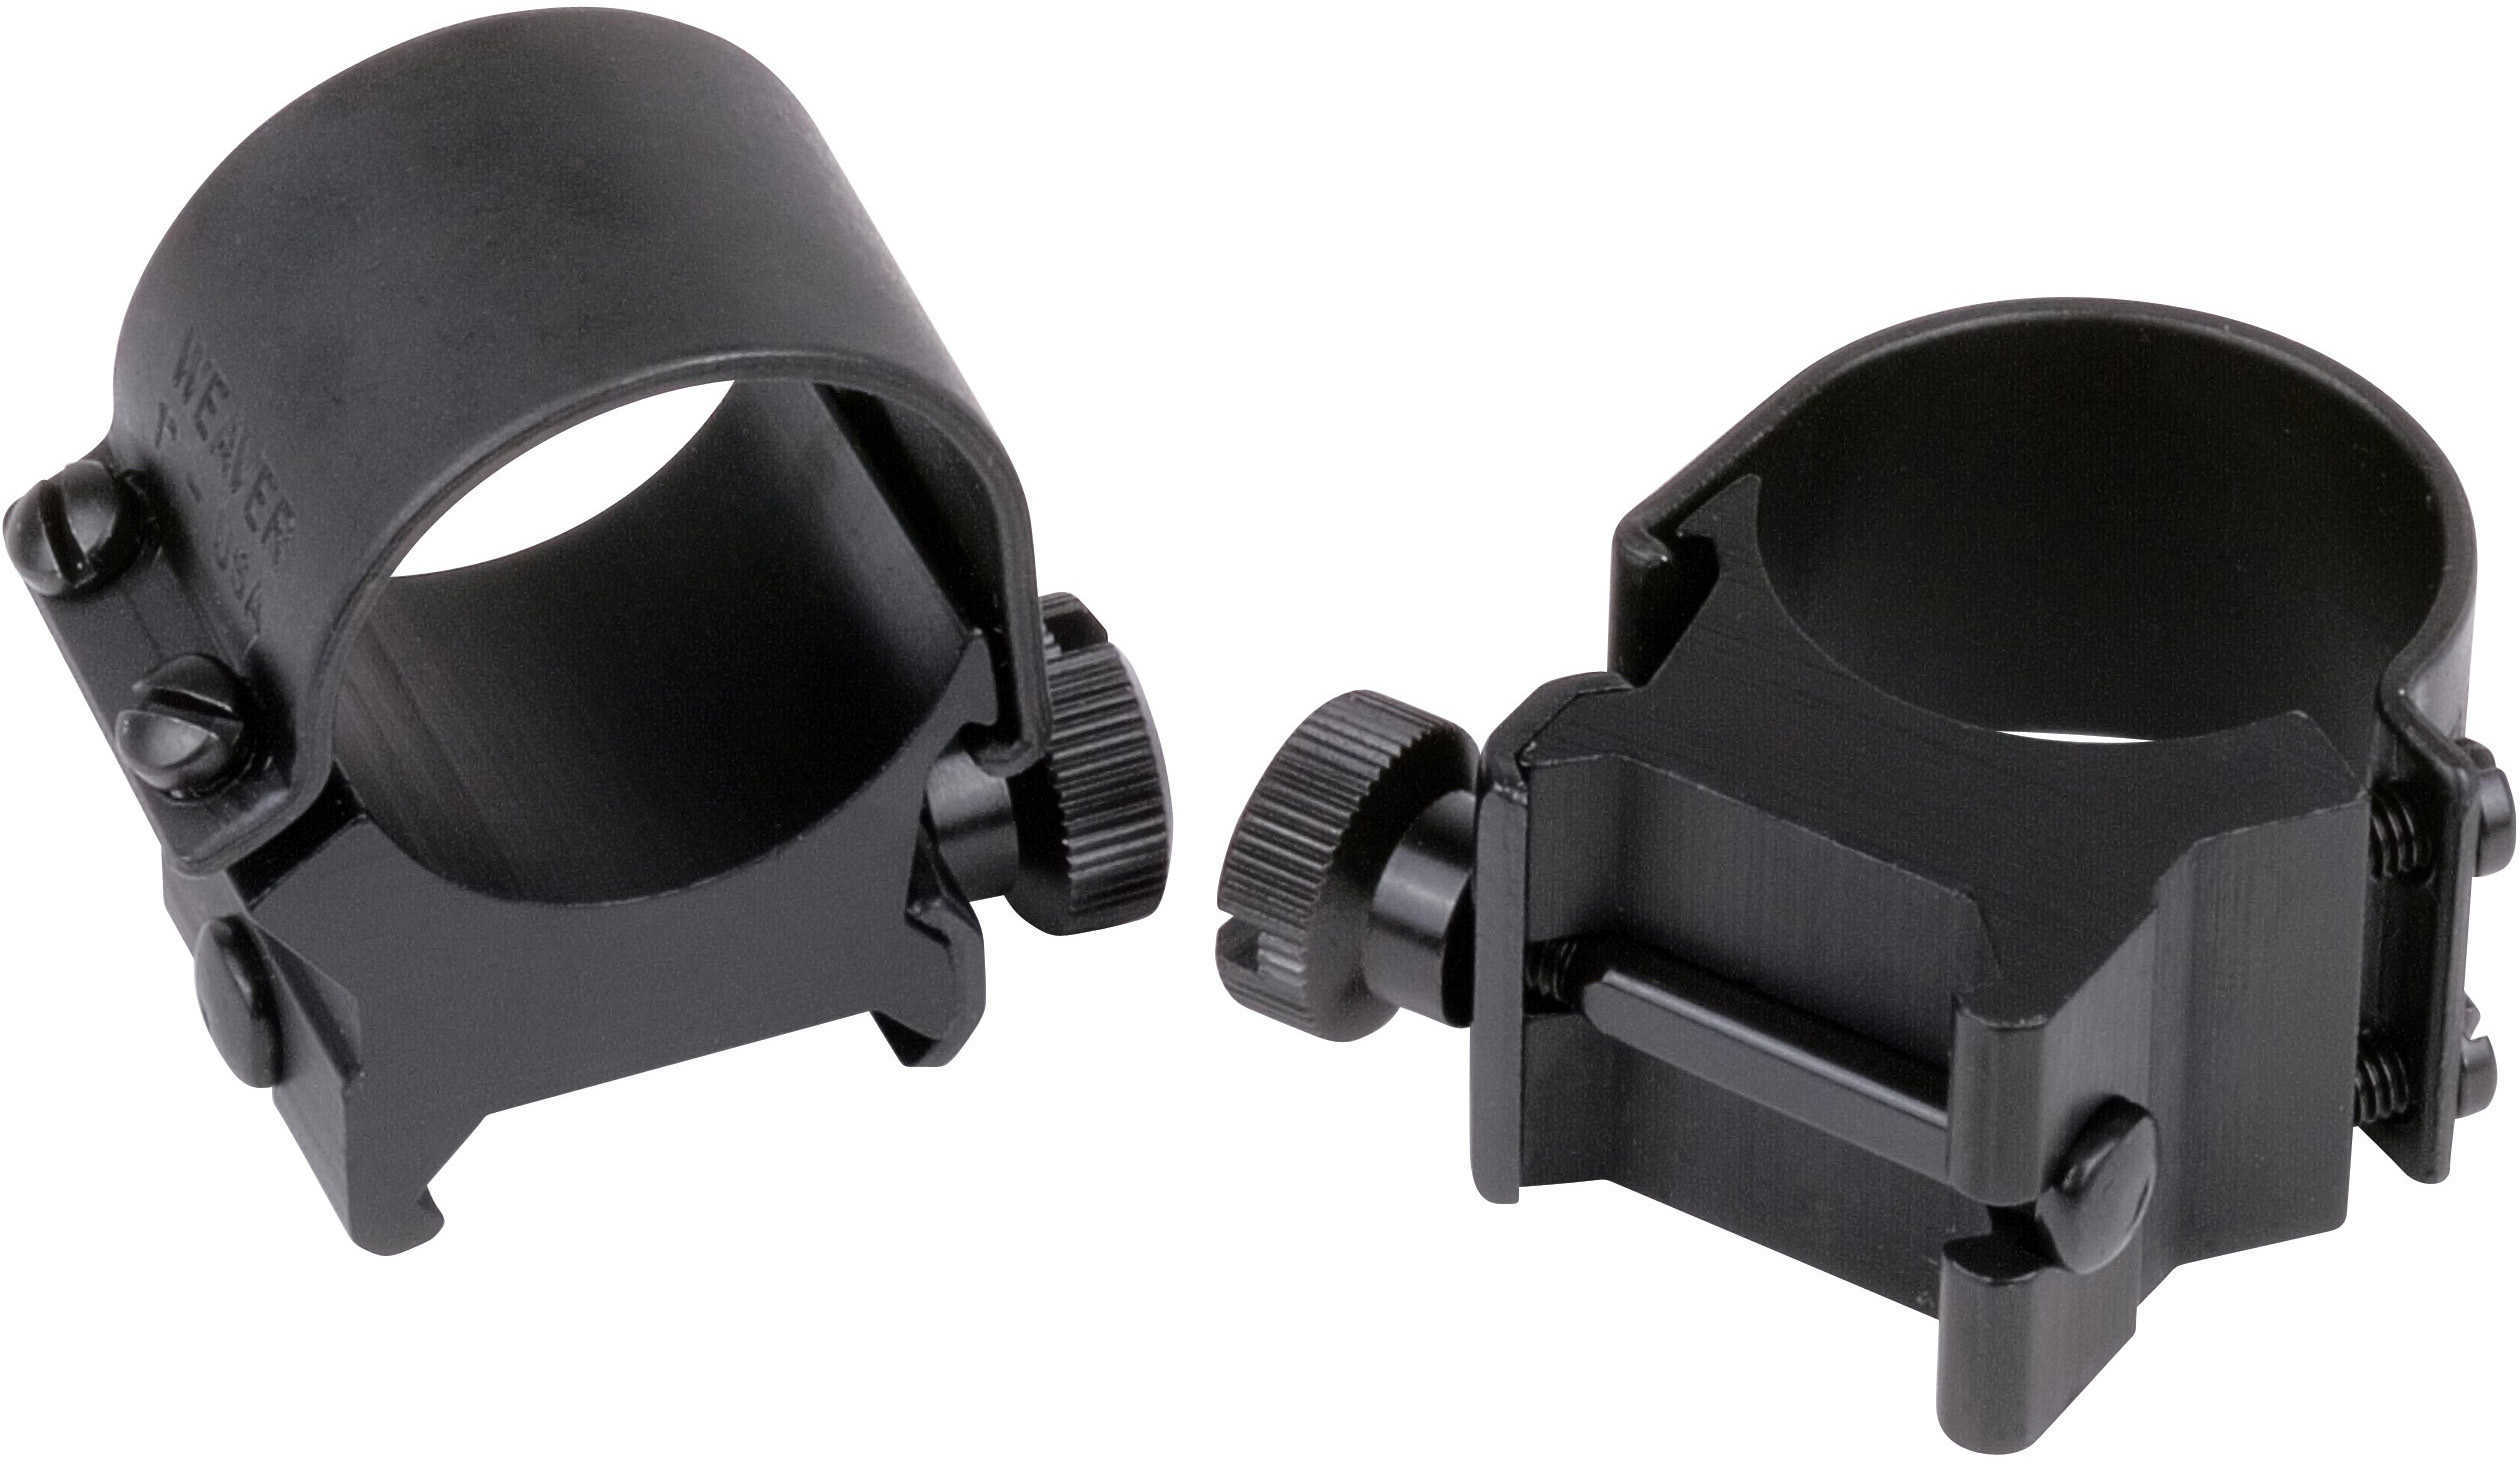 Simmons Weaver 30MM High Detachable Top Mount Rings With Matte Black Finish Md: 49120